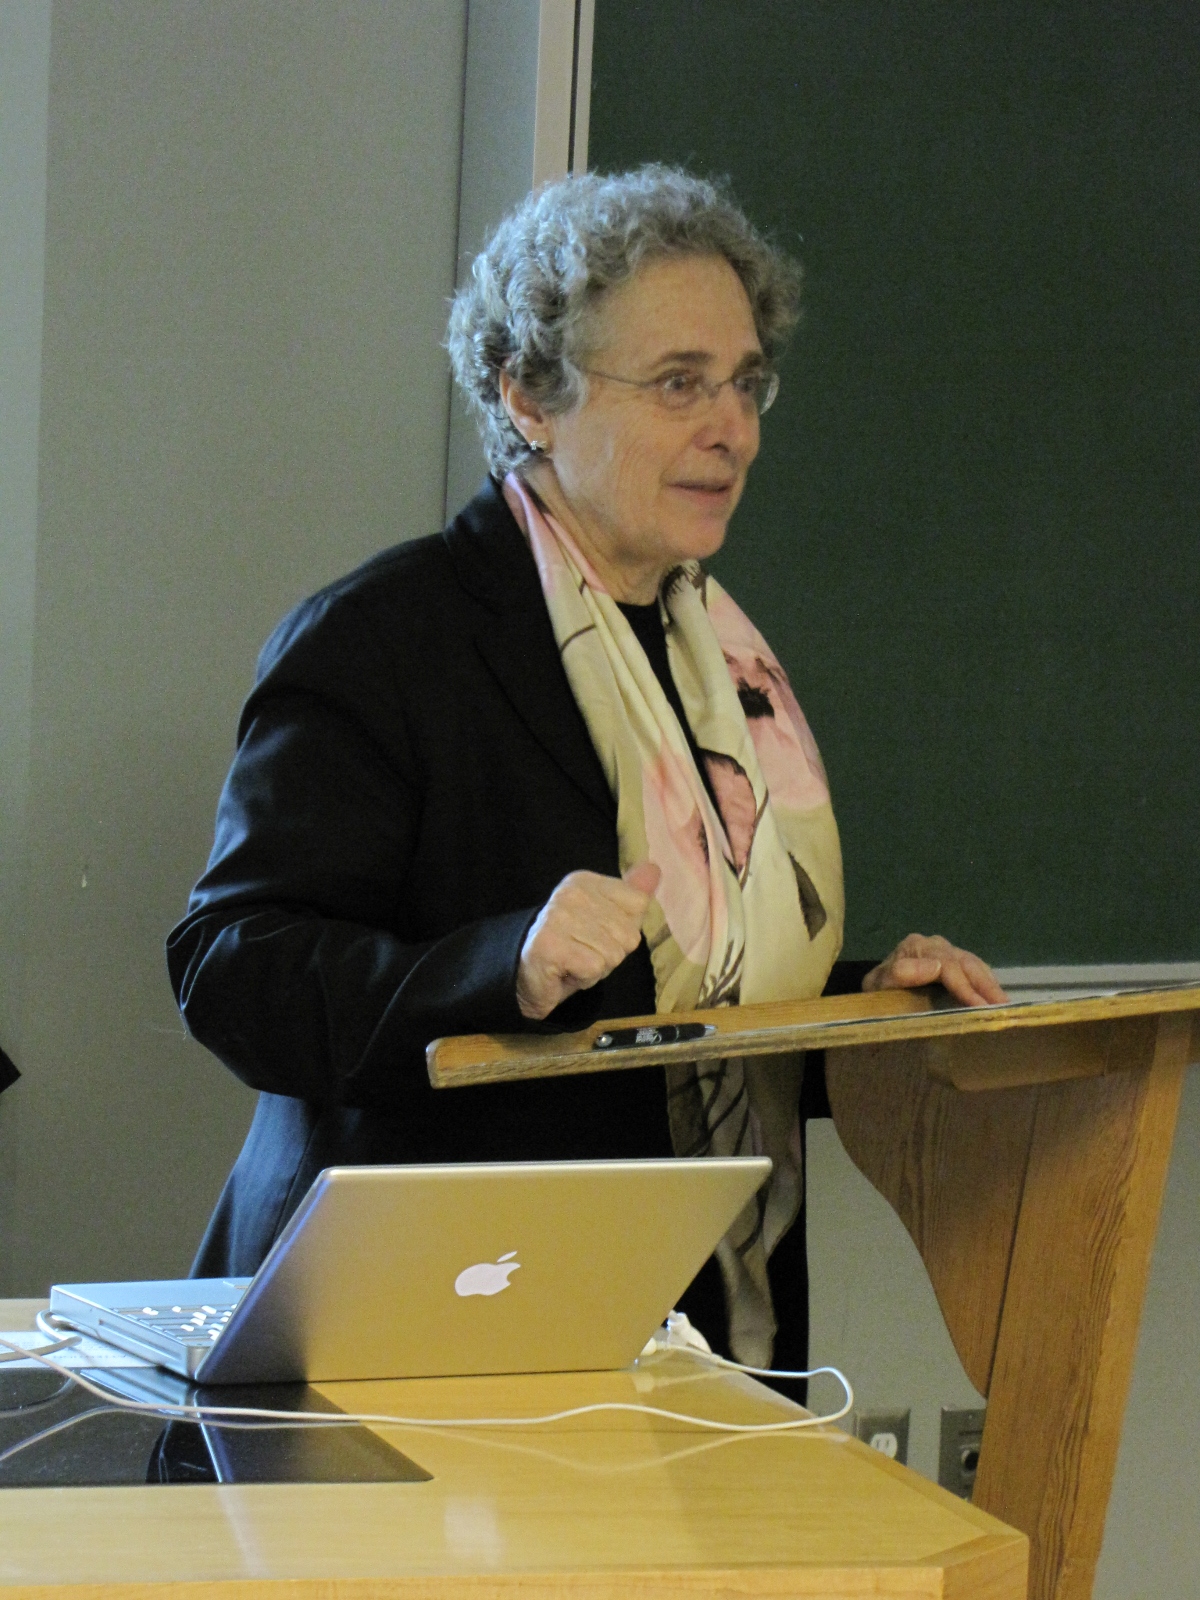 Prof. Clara Bargellini, from the Ntional University of Mexico, keynote speaker of LARG's 4th workshop.